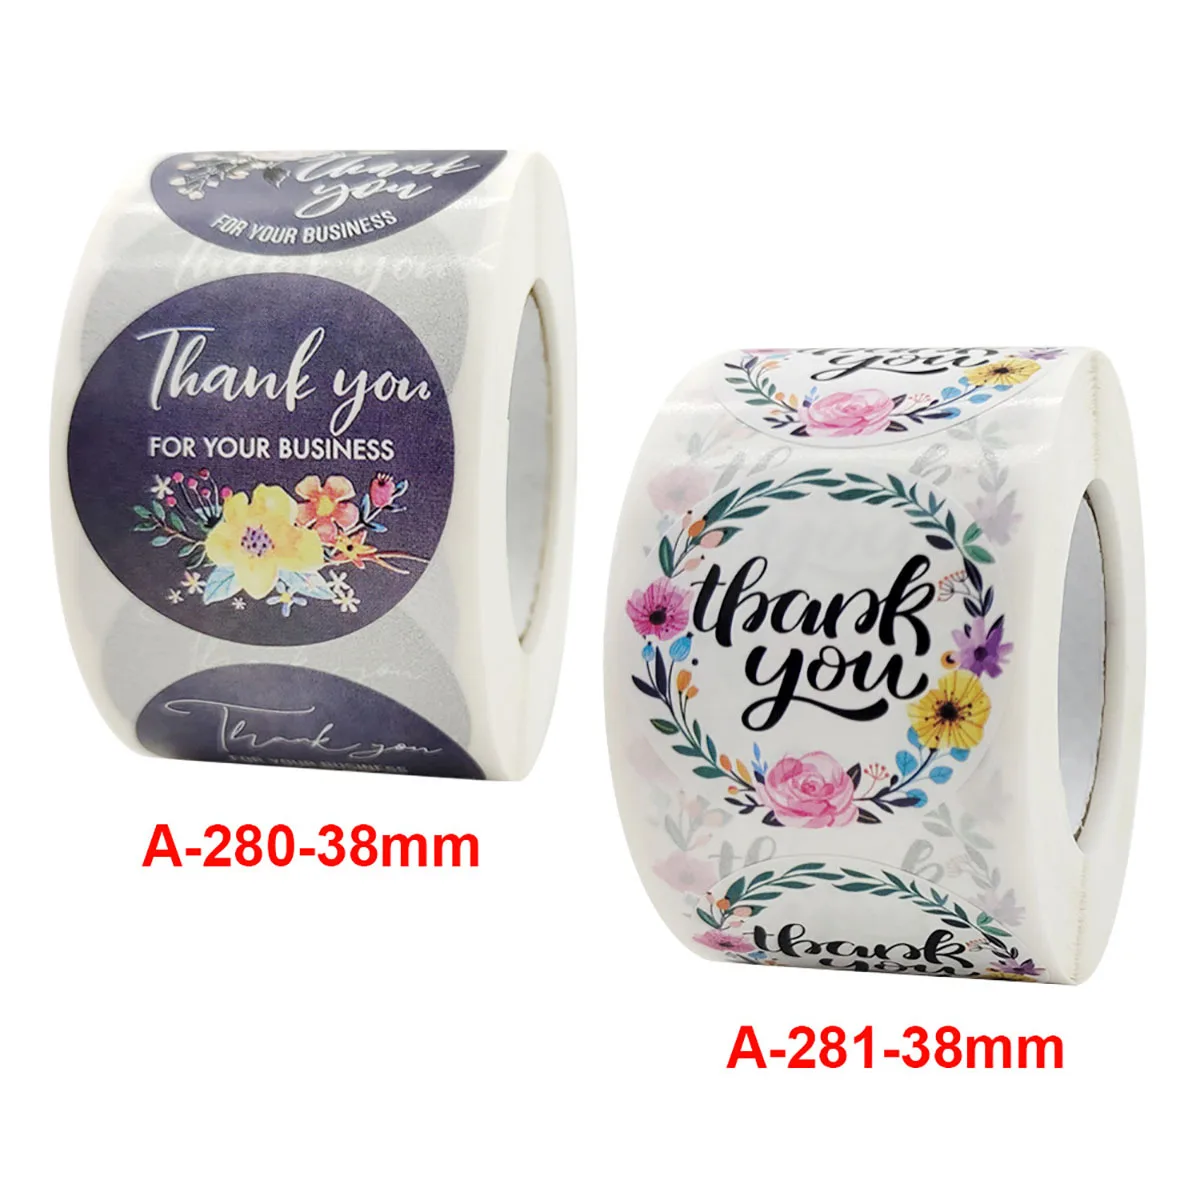 

500Pcs 1.5inch Flower Plants Stickers For Thank You Customer Labels Gift Decoration Adhesive Envelope Sealing Cards Round Black